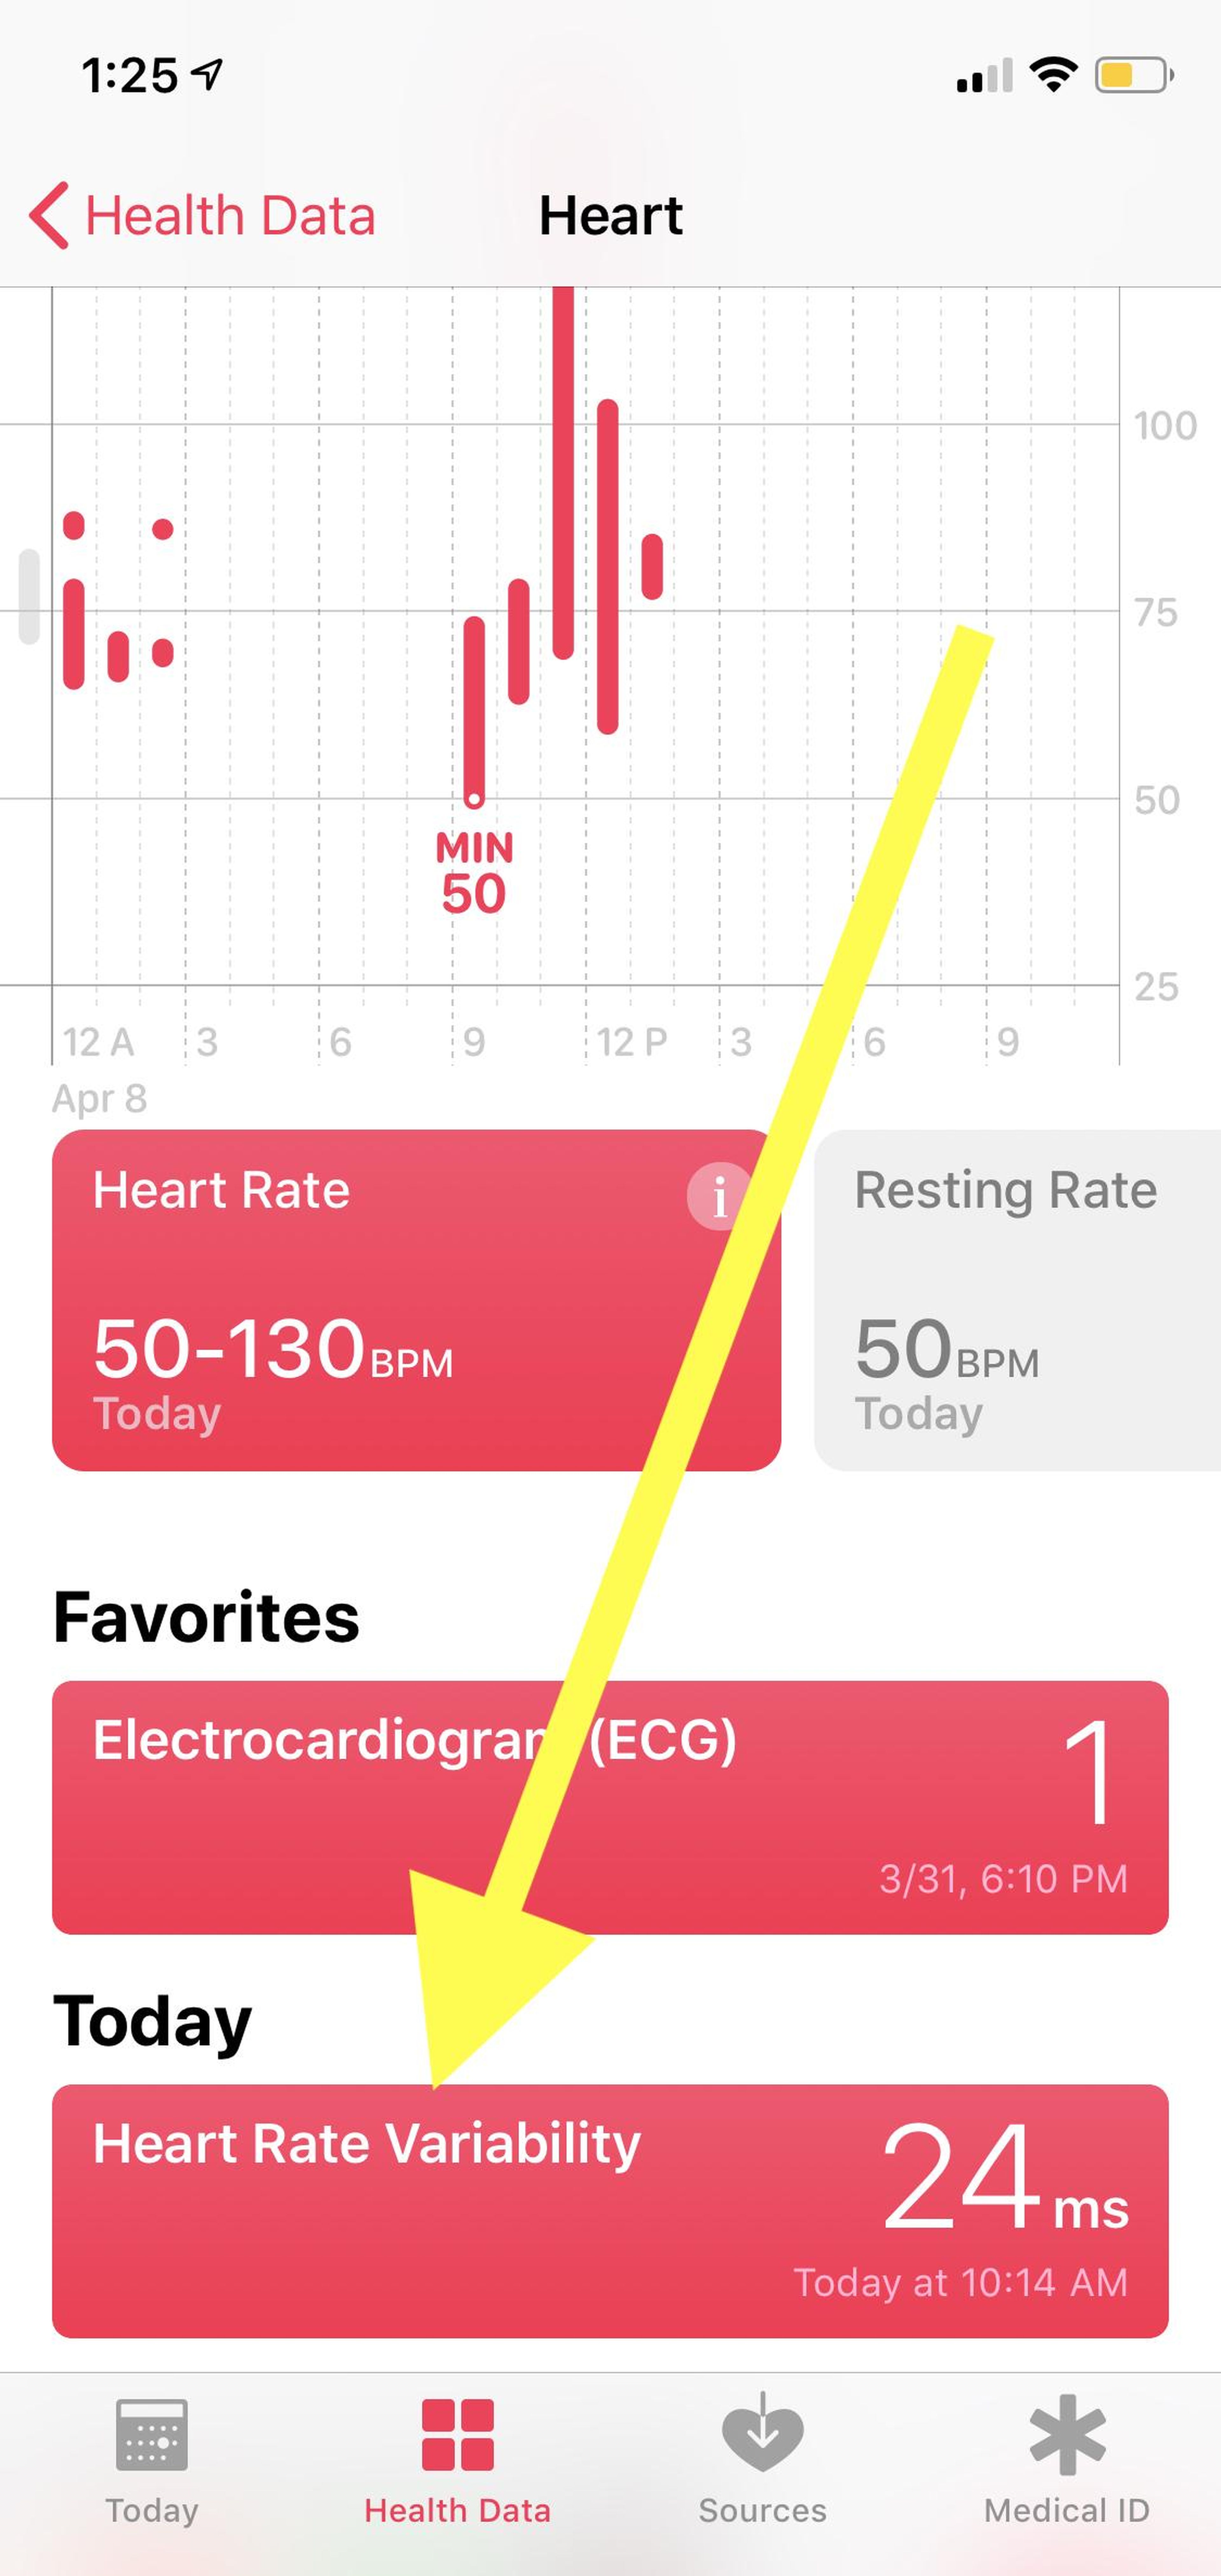 Nancy recommends the heart rate variability feature.